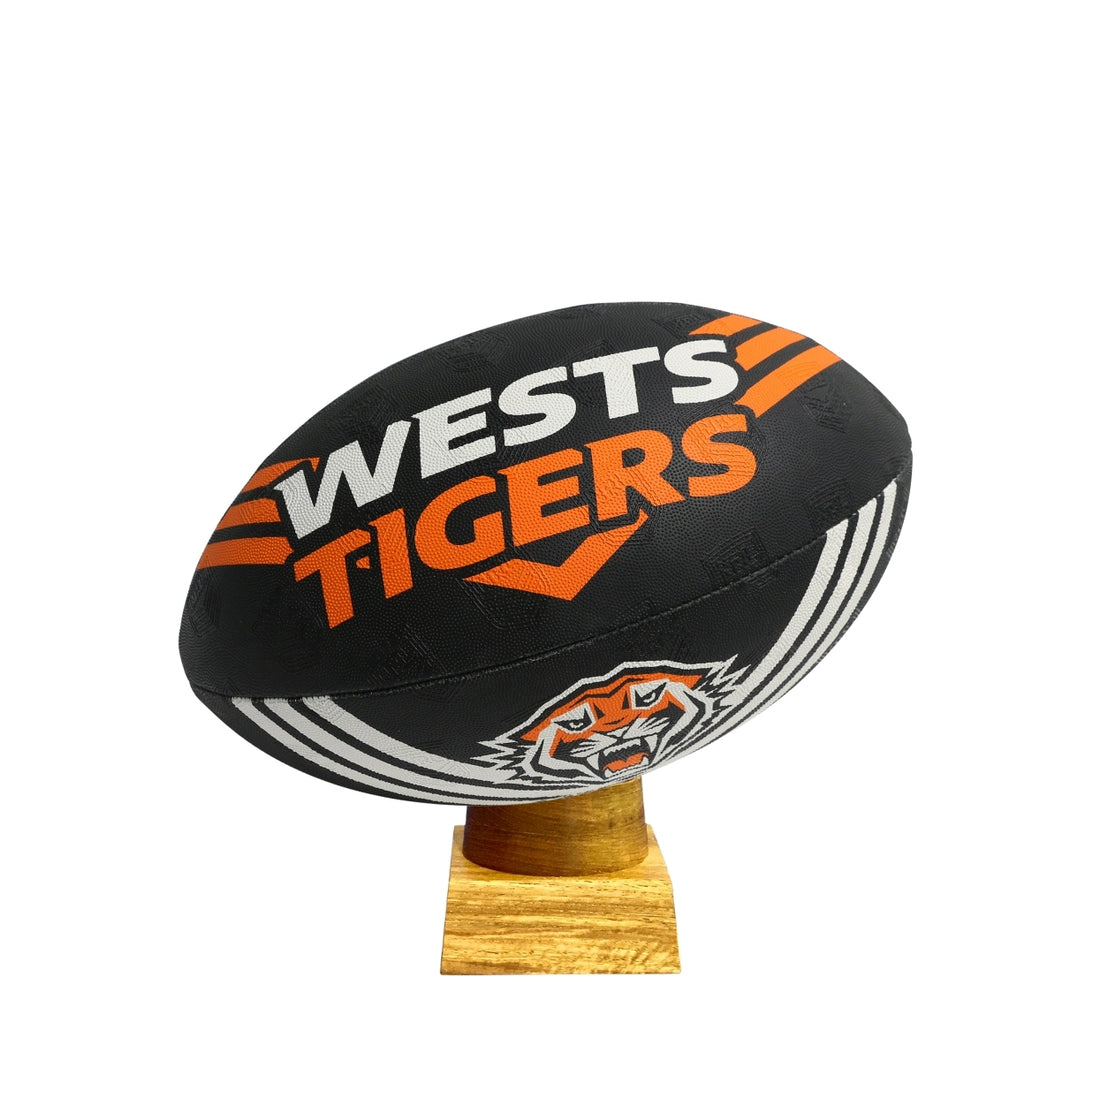 Wests Tigers Football Urn for Ashes with personalised timber display stand